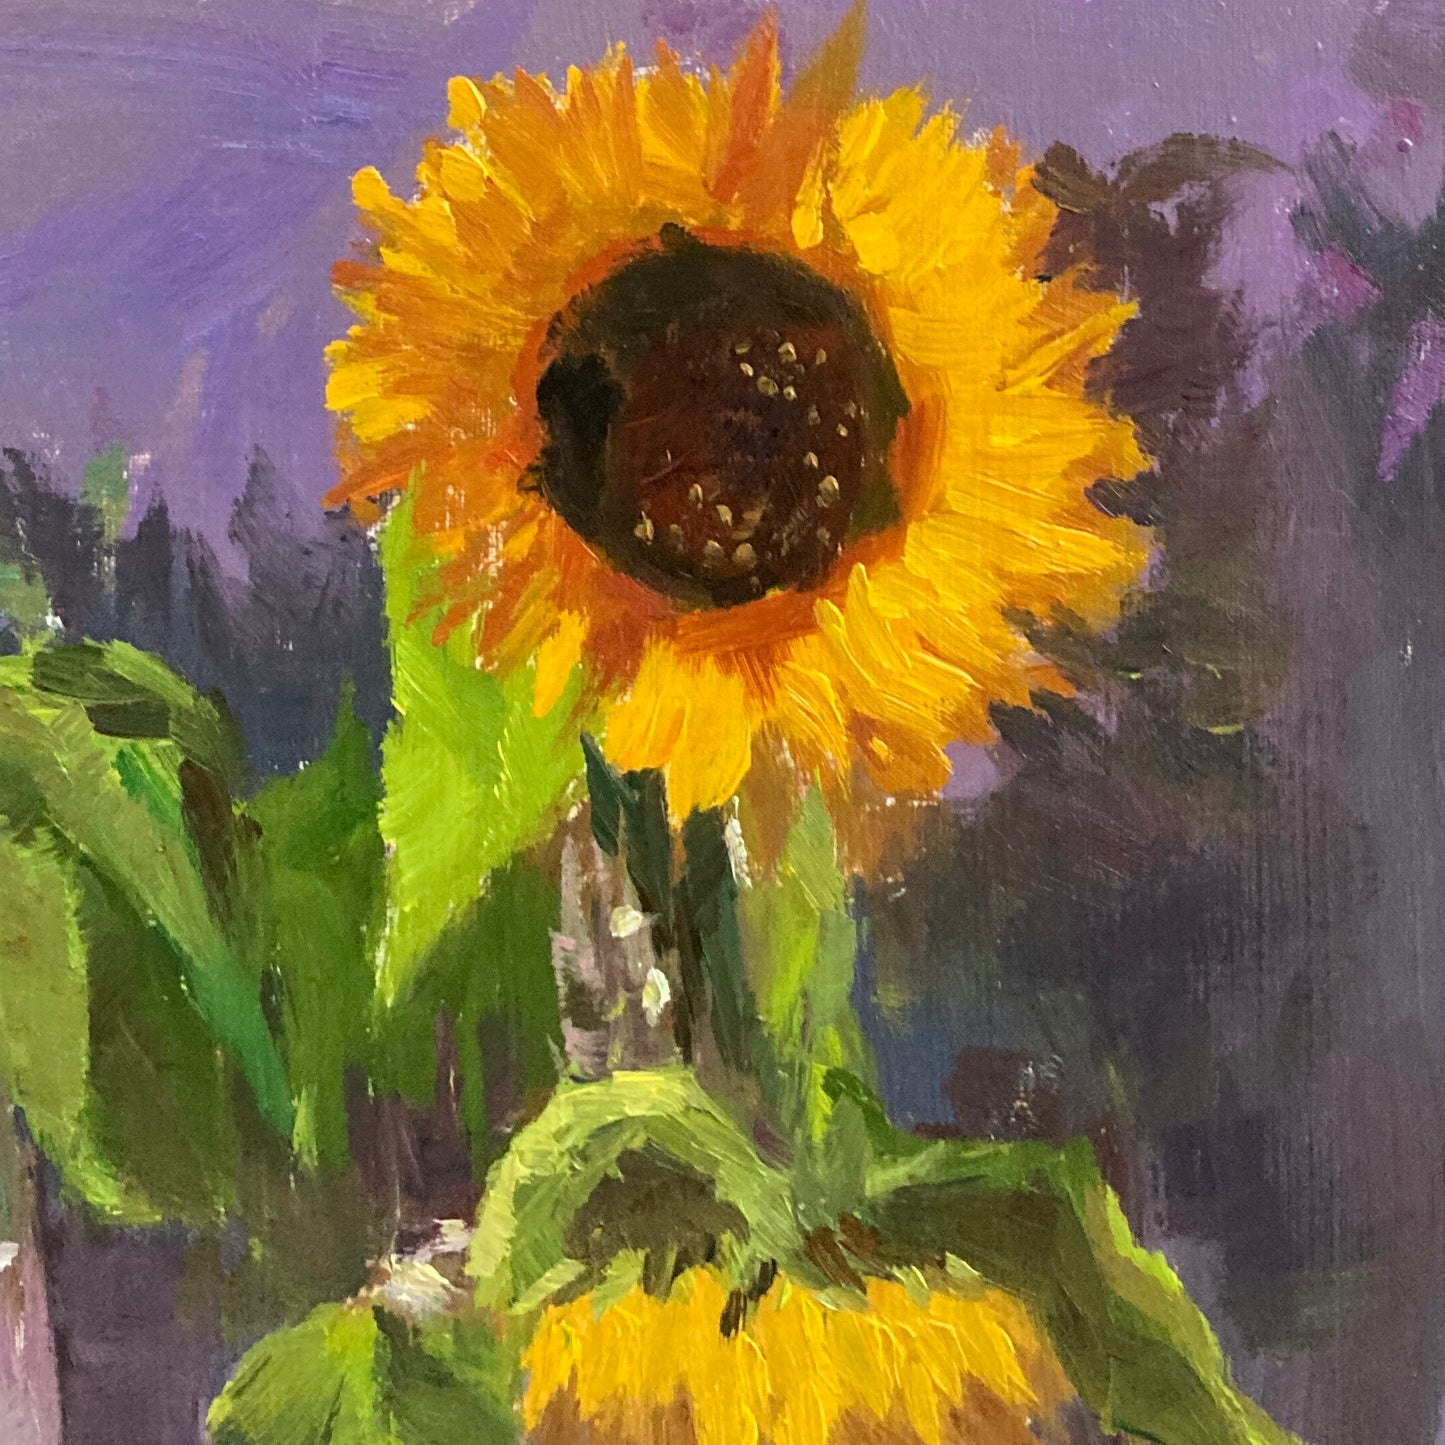 Sunflowers on Purple - Original Still Life Oil Painting, 12 by 12 inches